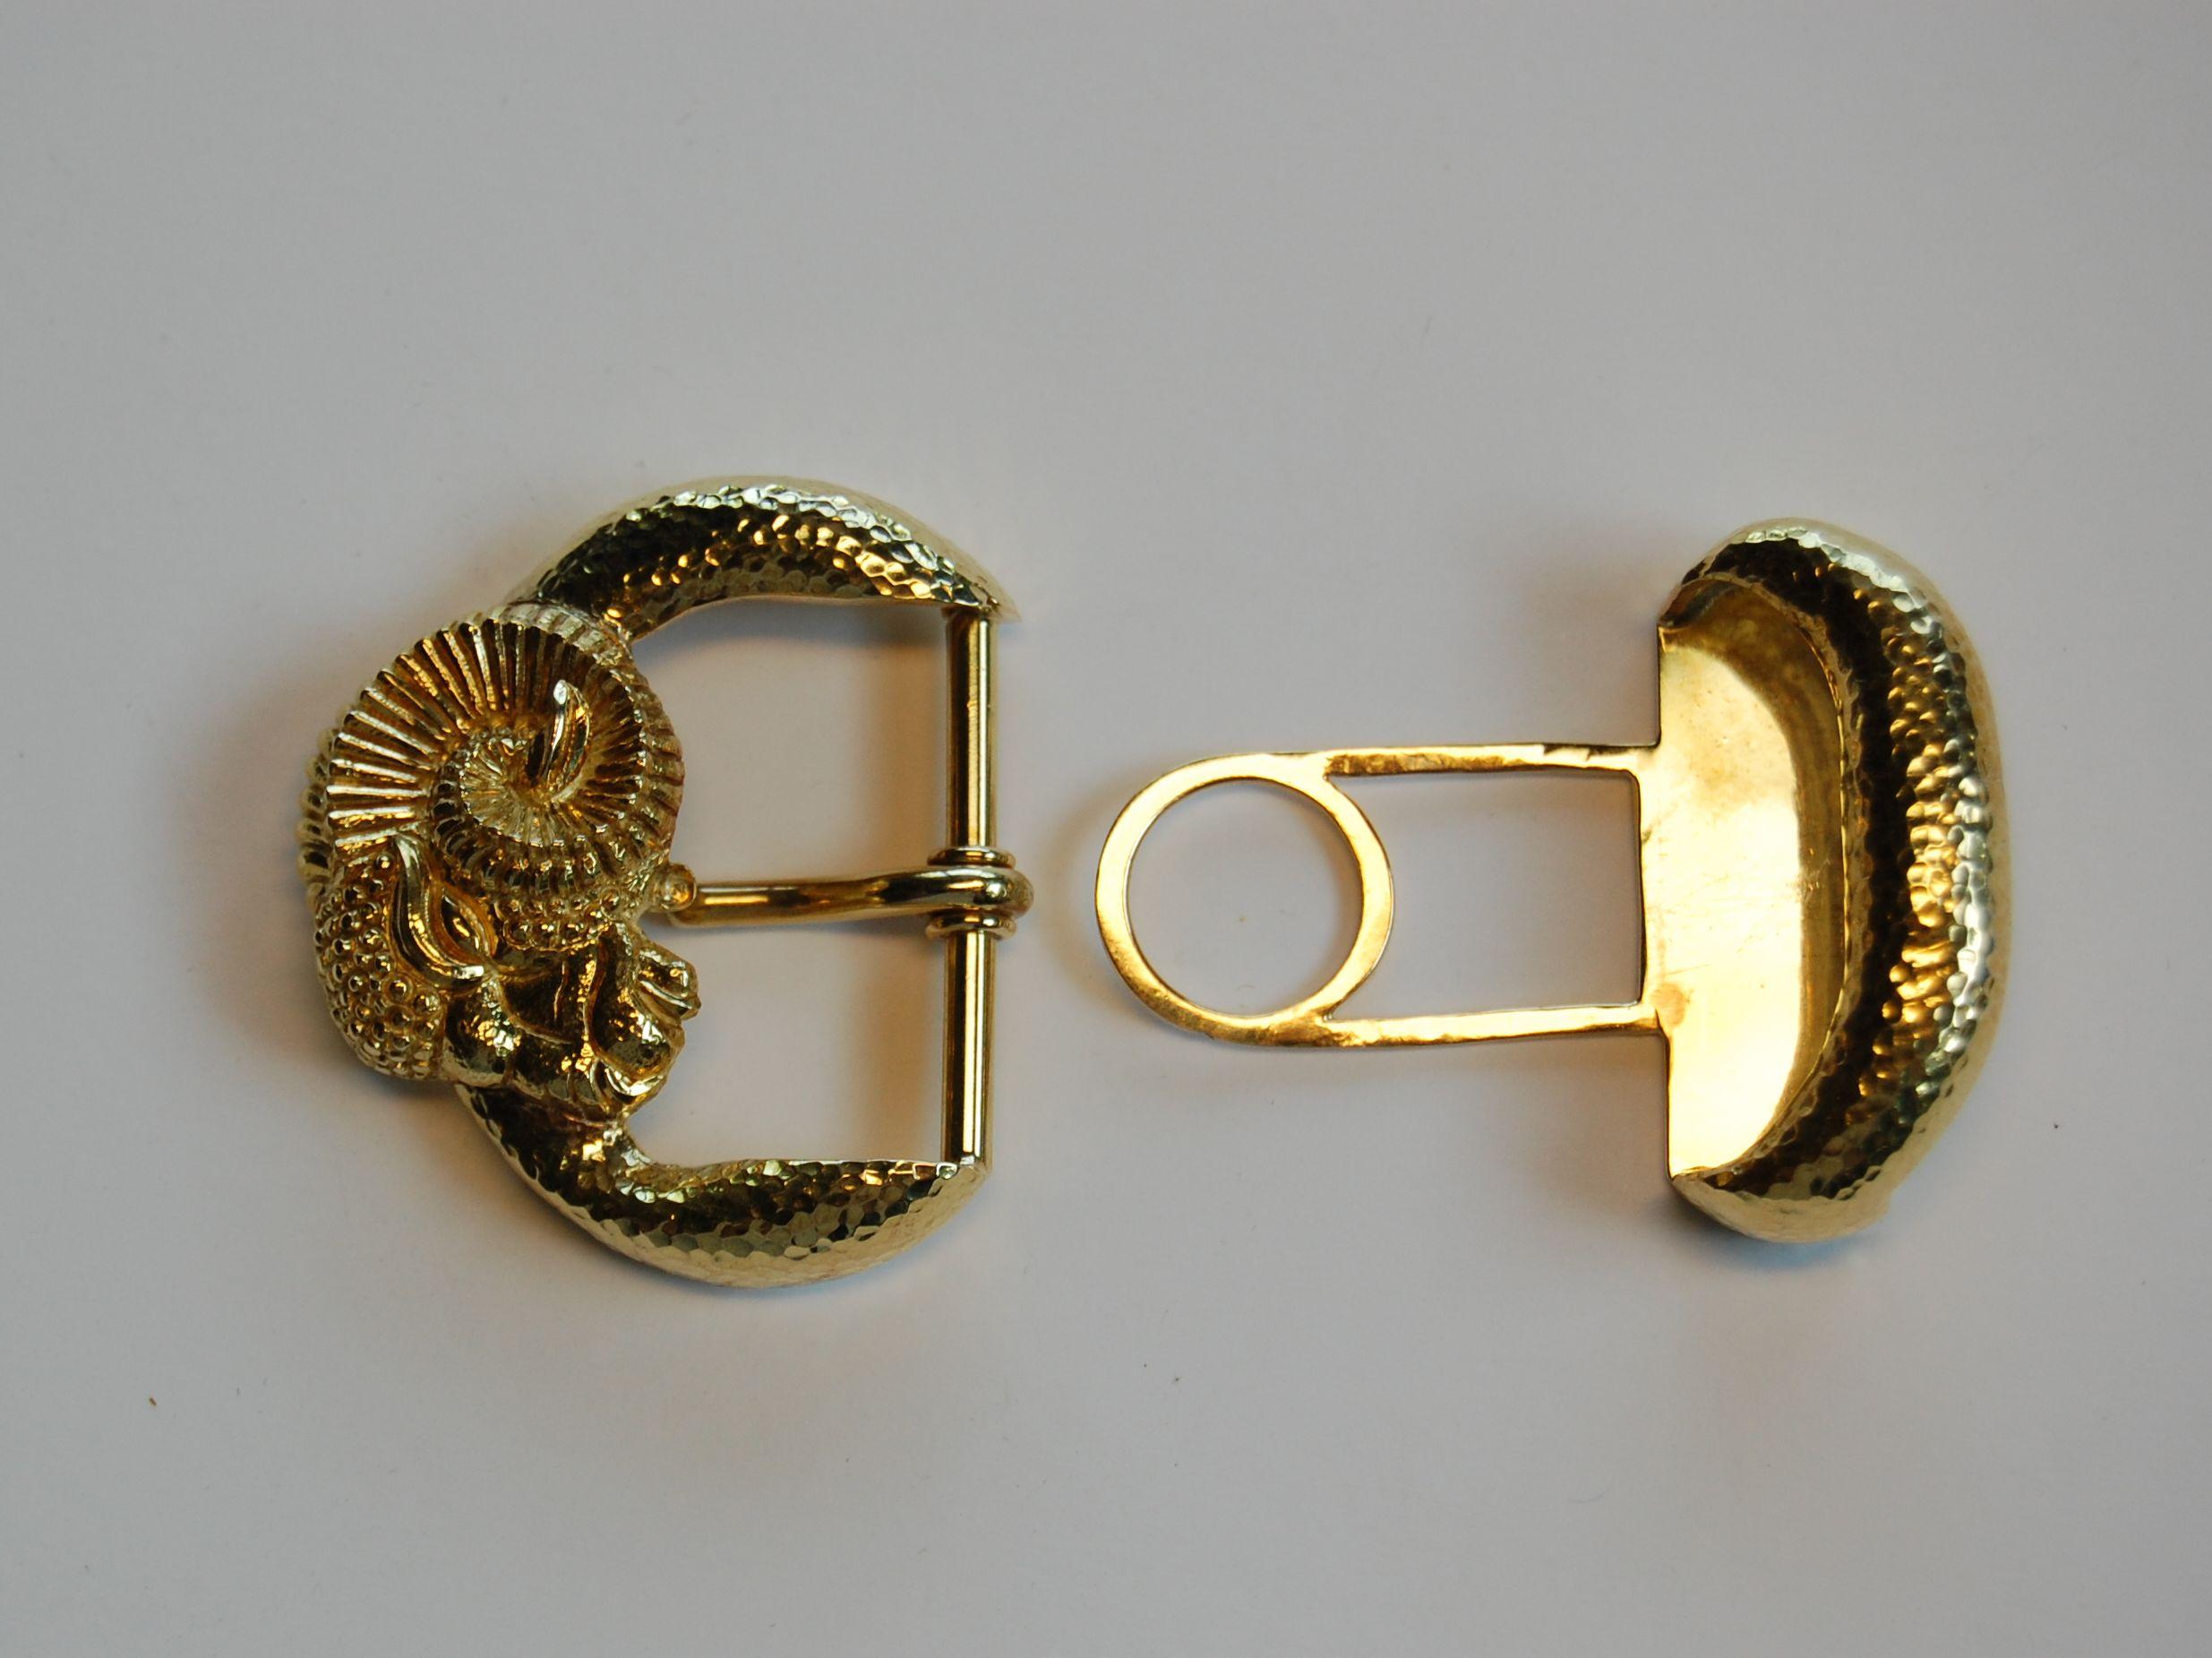 Hand-Crafted 18-Karat Yellow Gold Rams Head Belt Buckle from the Kingdom Collection, 1980s For Sale